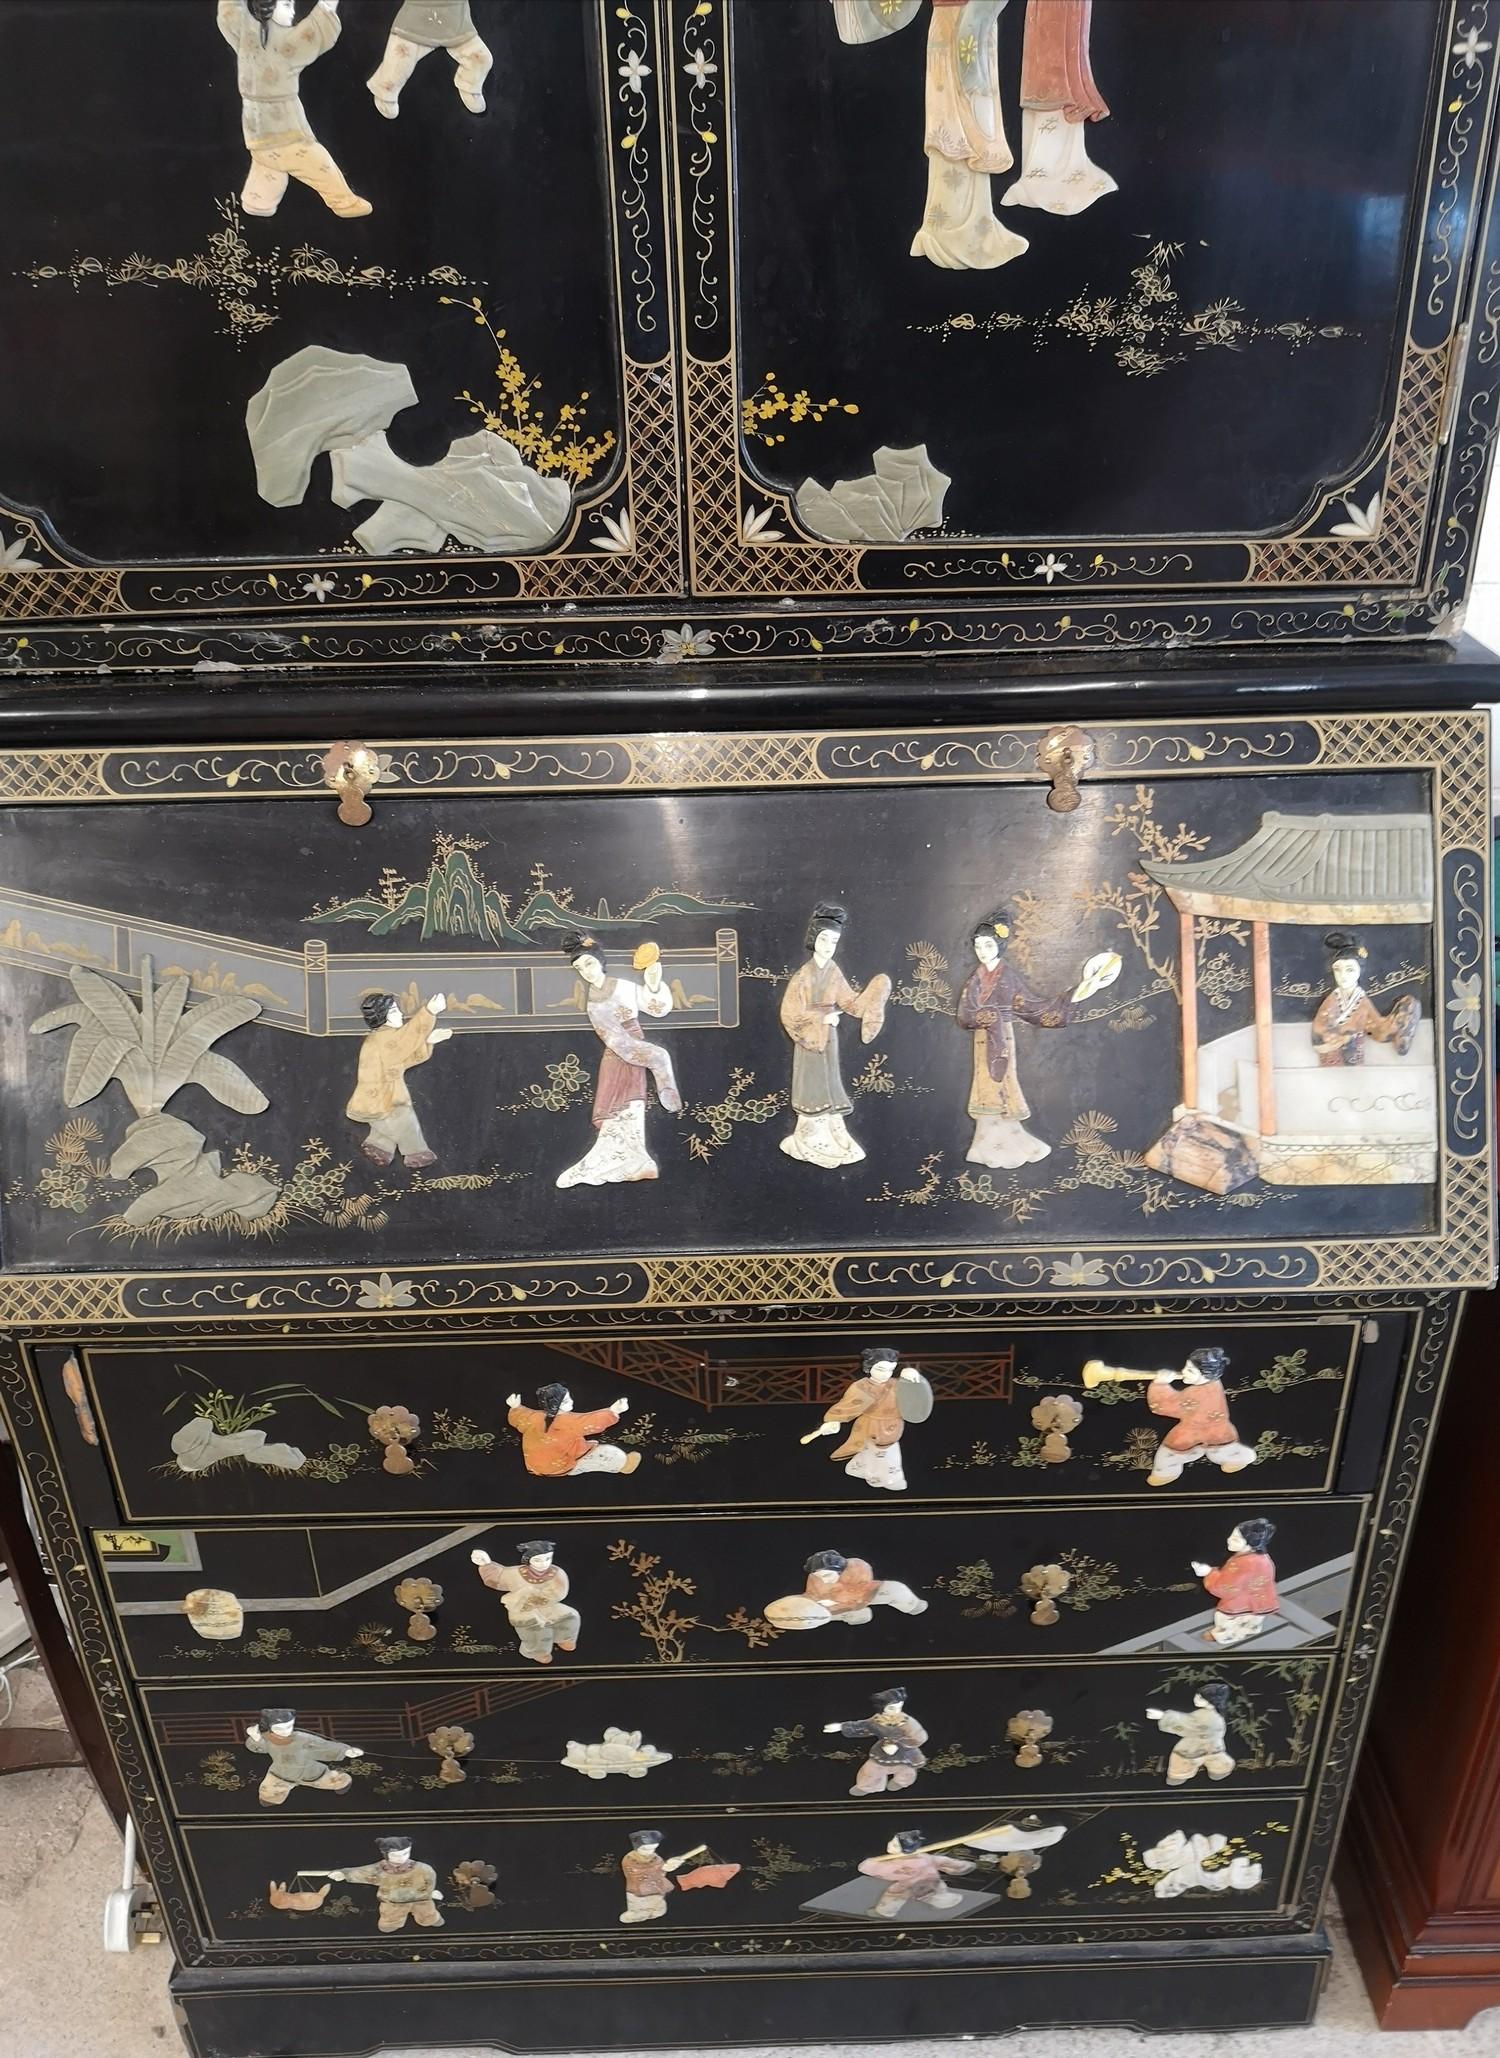 Chinoissere 2 section Oriental bureau book case with mother of pearl inlays etc. - Image 3 of 6